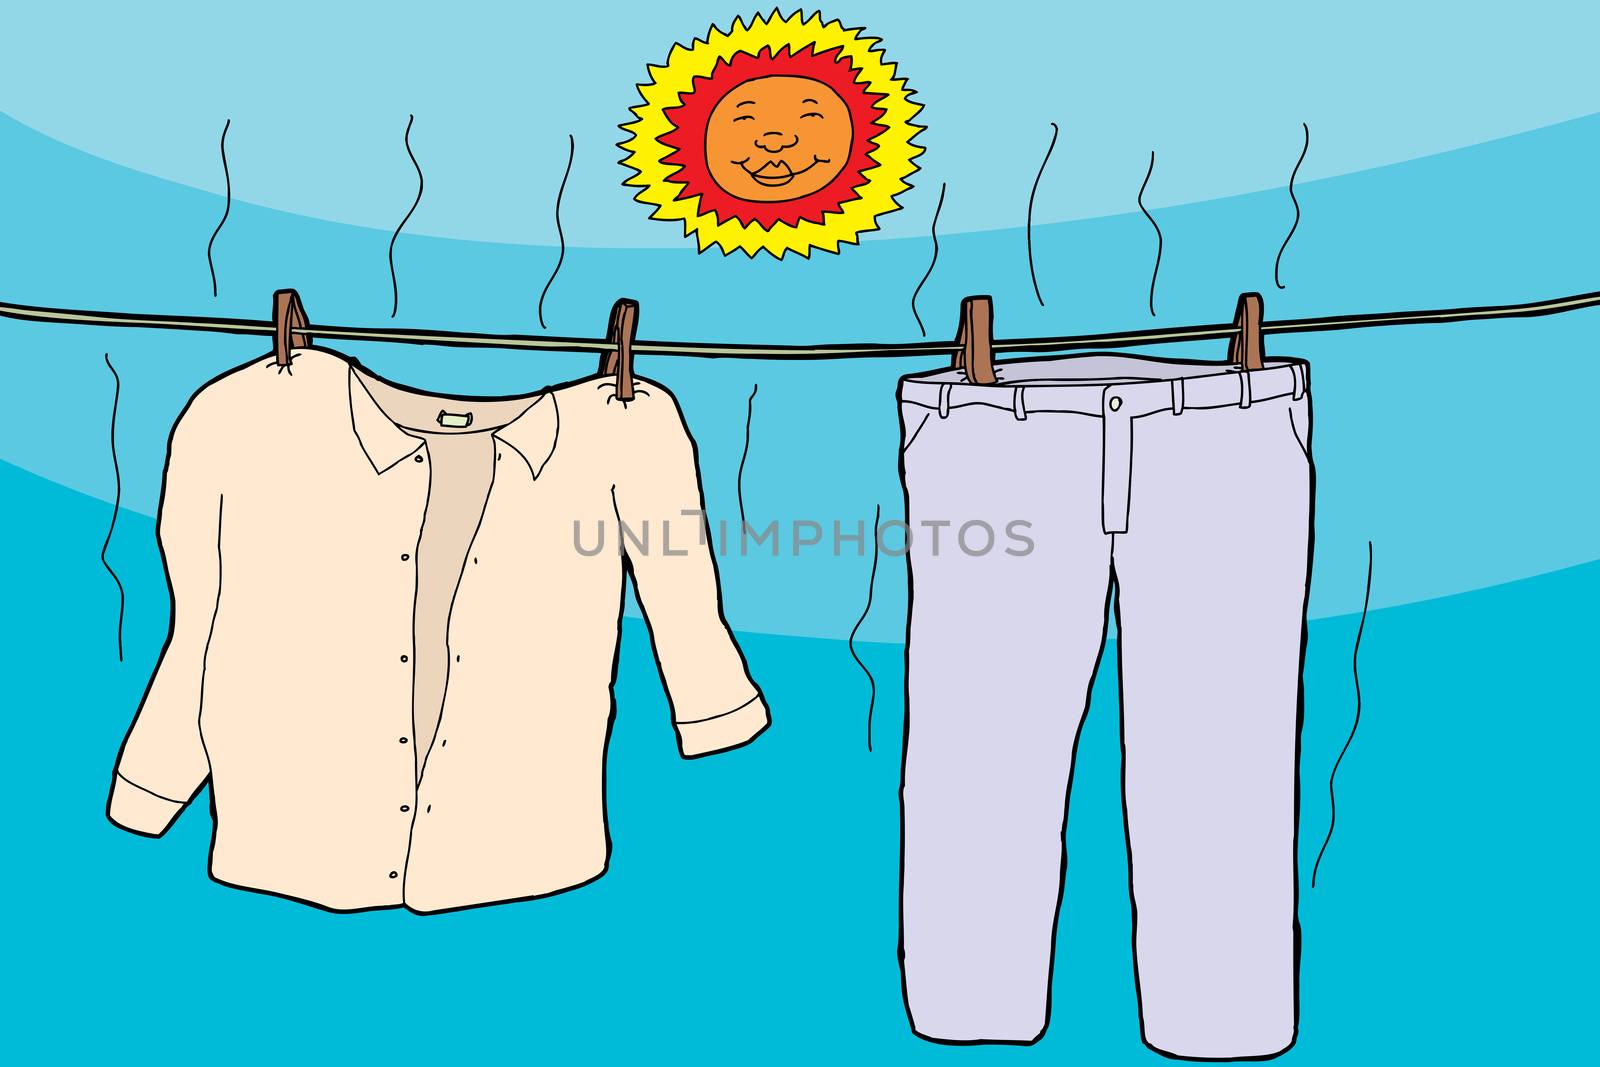 Damp clothes on clothesline drying under smiling sun